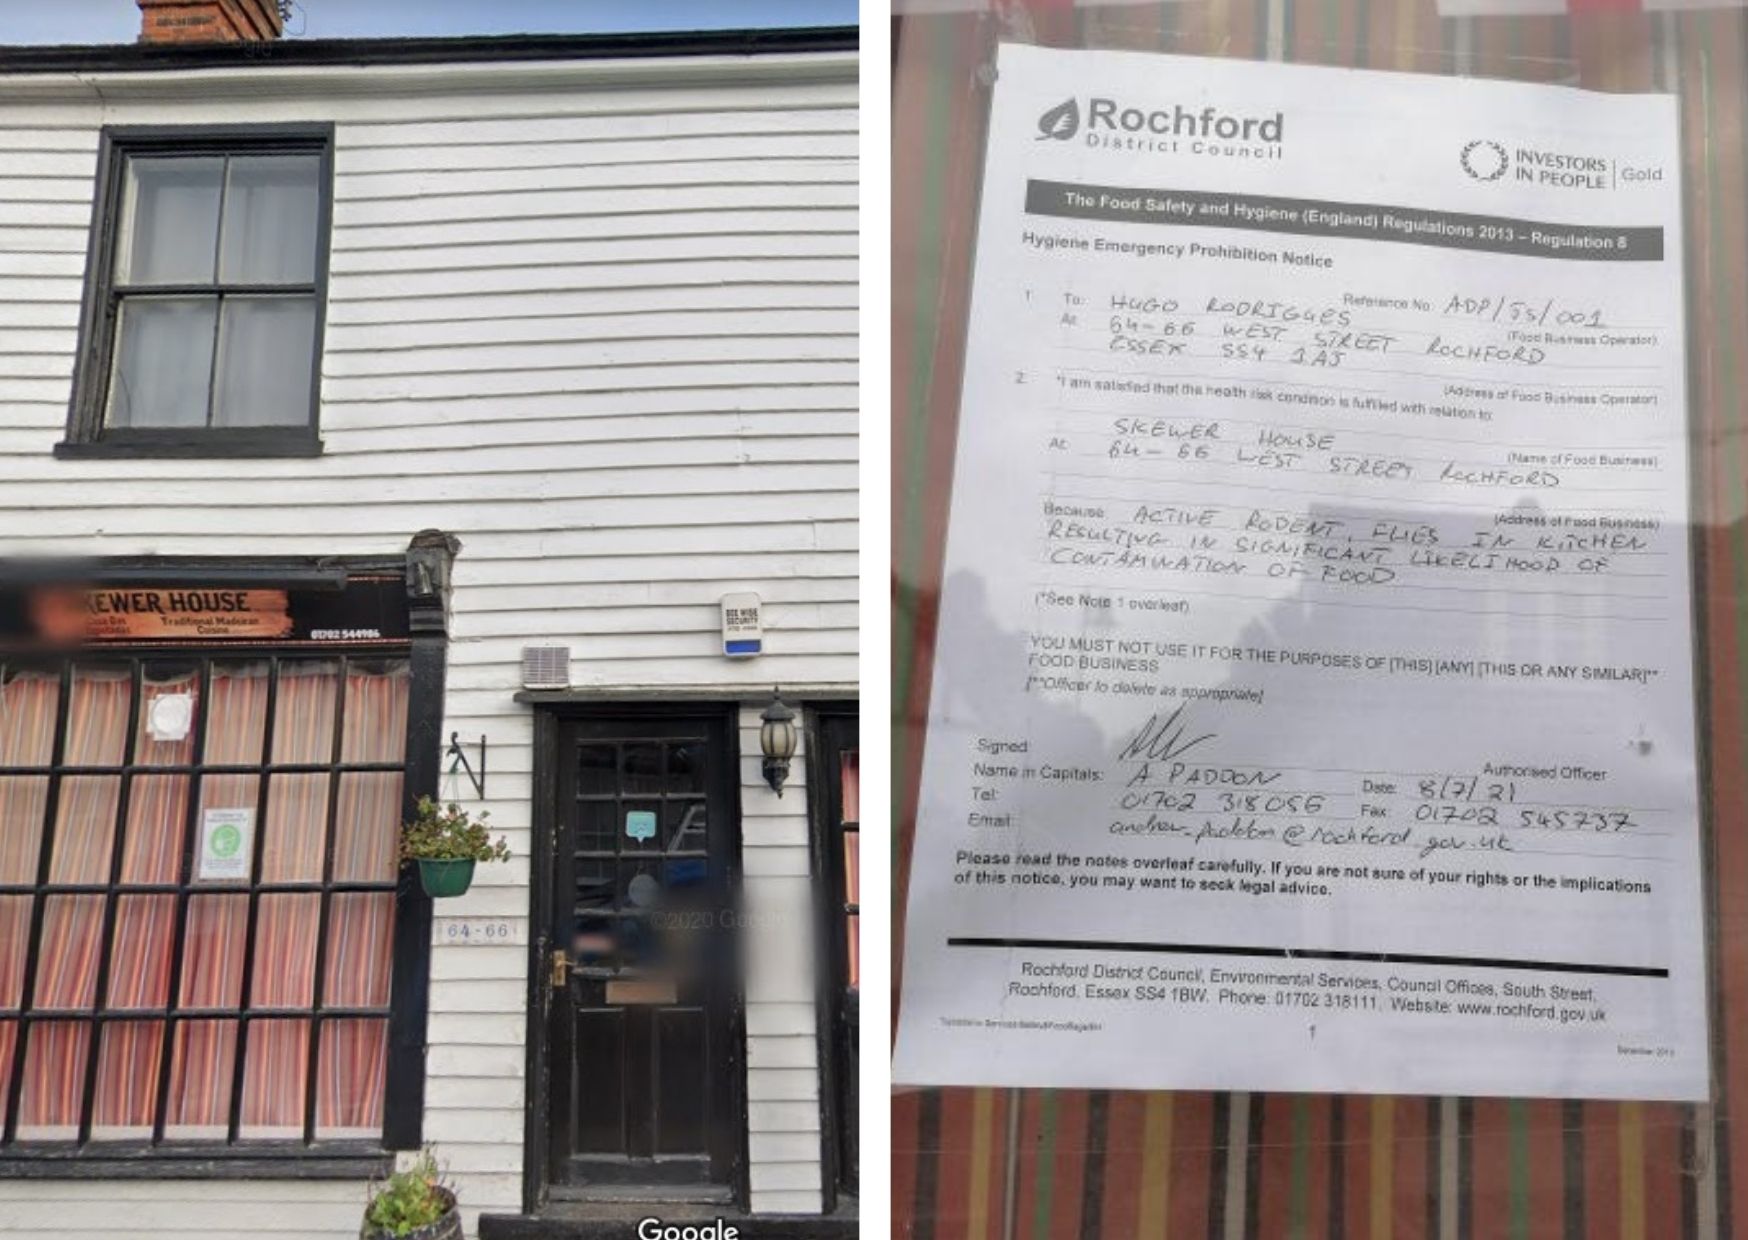 Skewer House Rochford: Eatery shut down due to health concerns